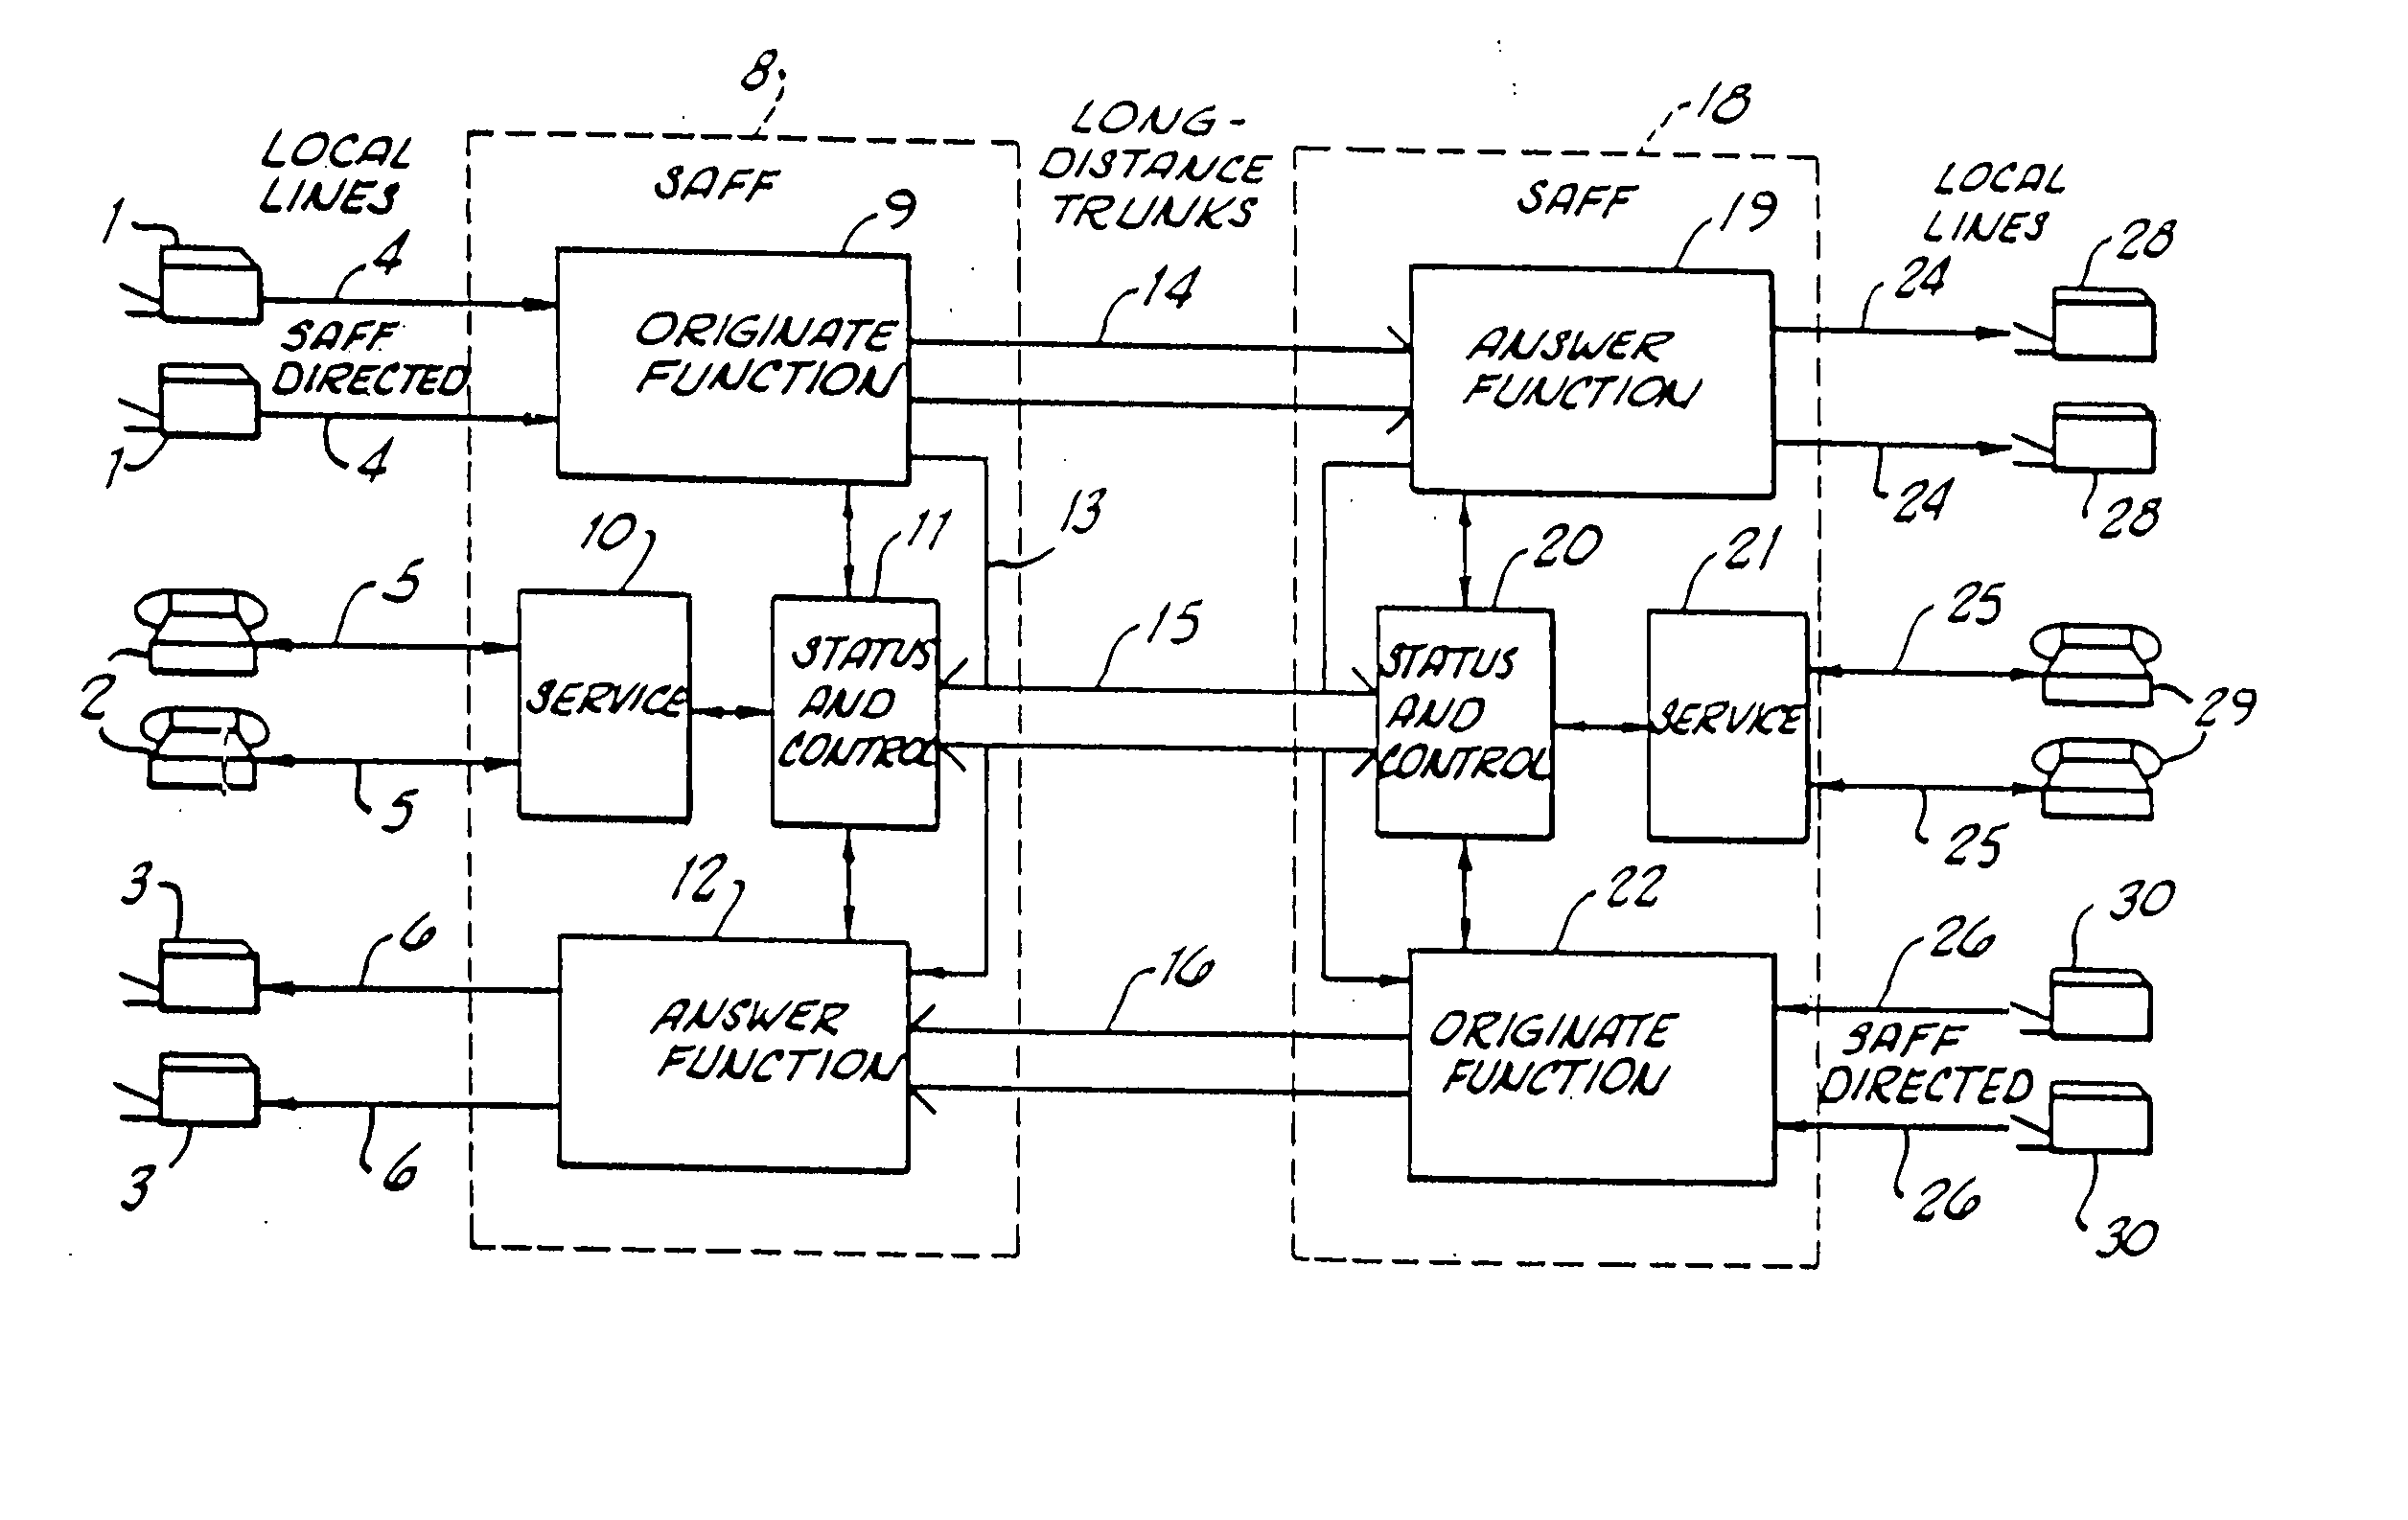 Facsimile telecommunications system and method